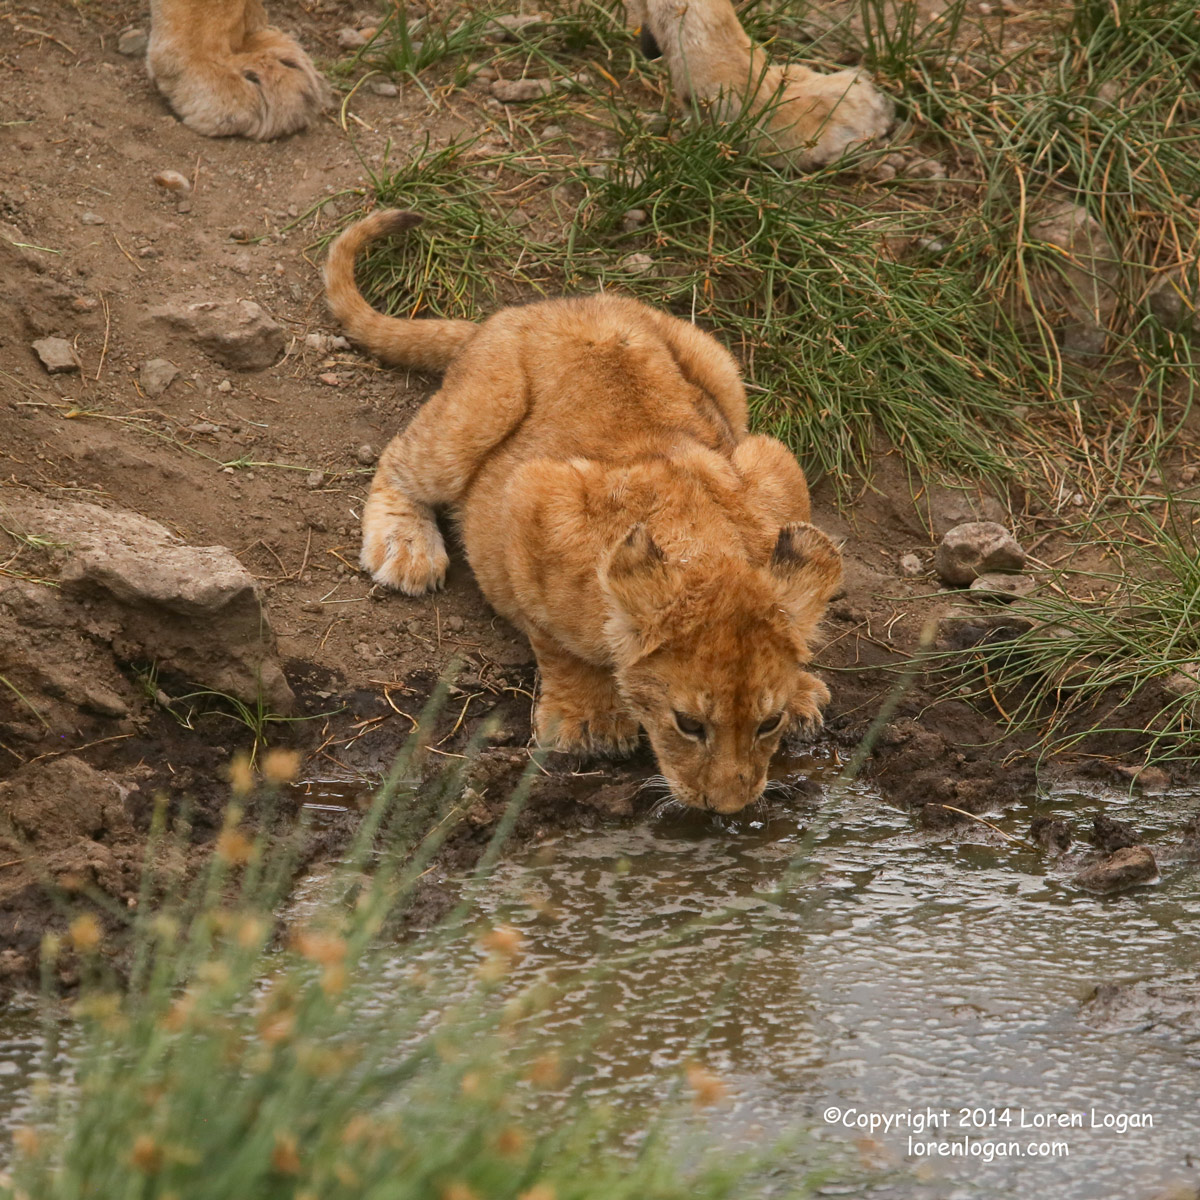 Mom's feet tread into the shot as she approached the water after her cub giving a sense of scale, intimacy and protection to...